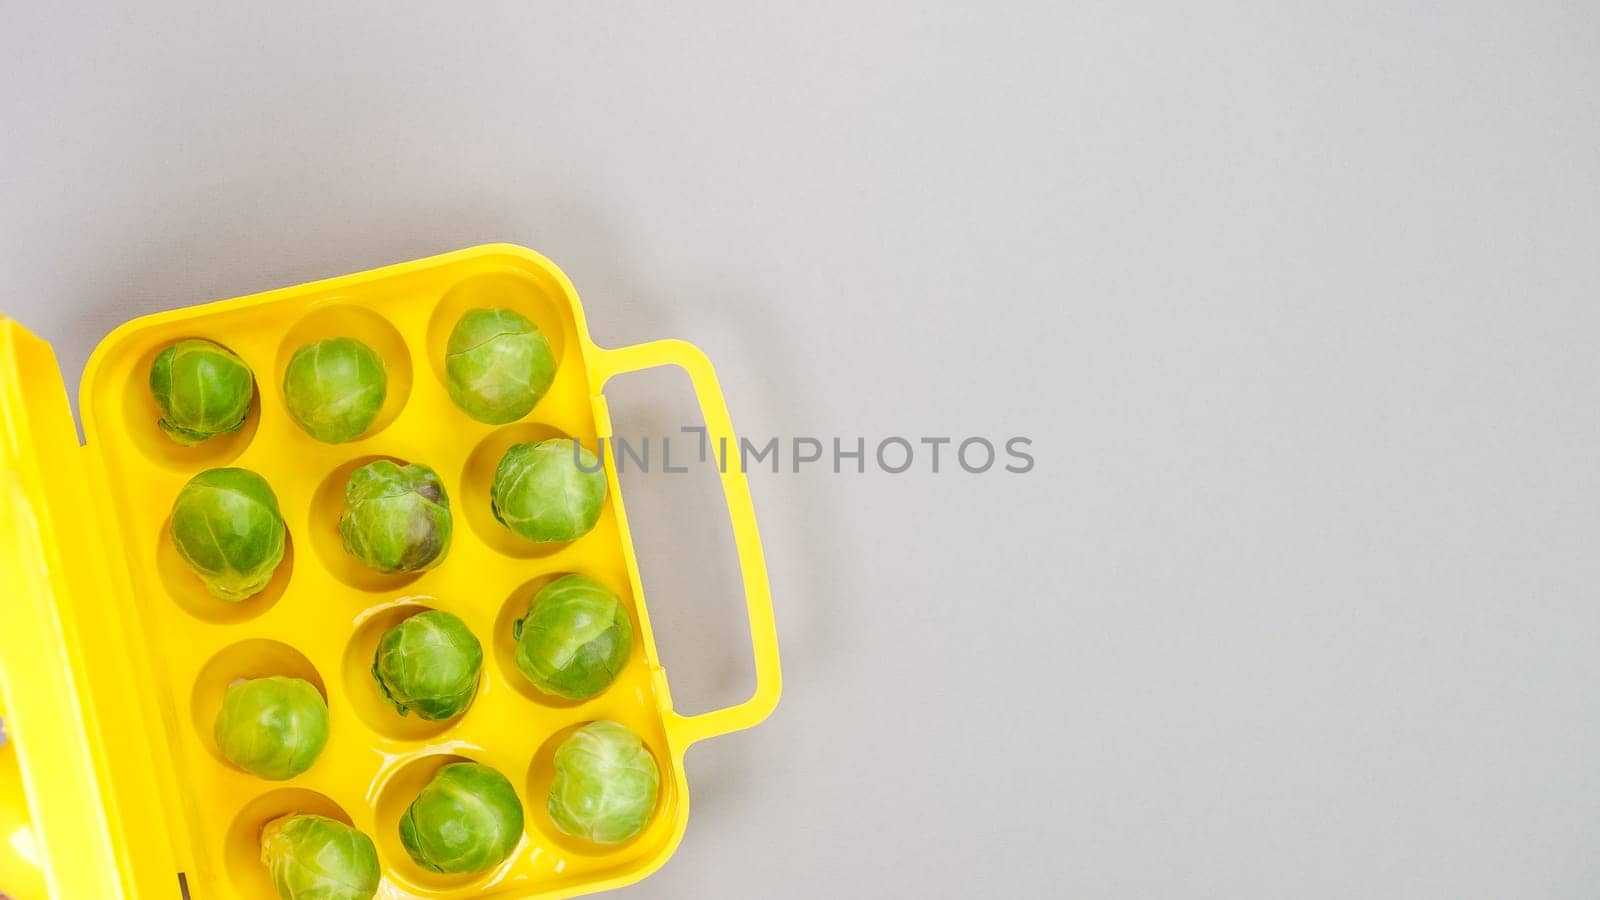 Raw organic Brussel sprouts in yellow container on grey background, top view. Flat lay, overhead, from above. Copy space. by JuliaDorian